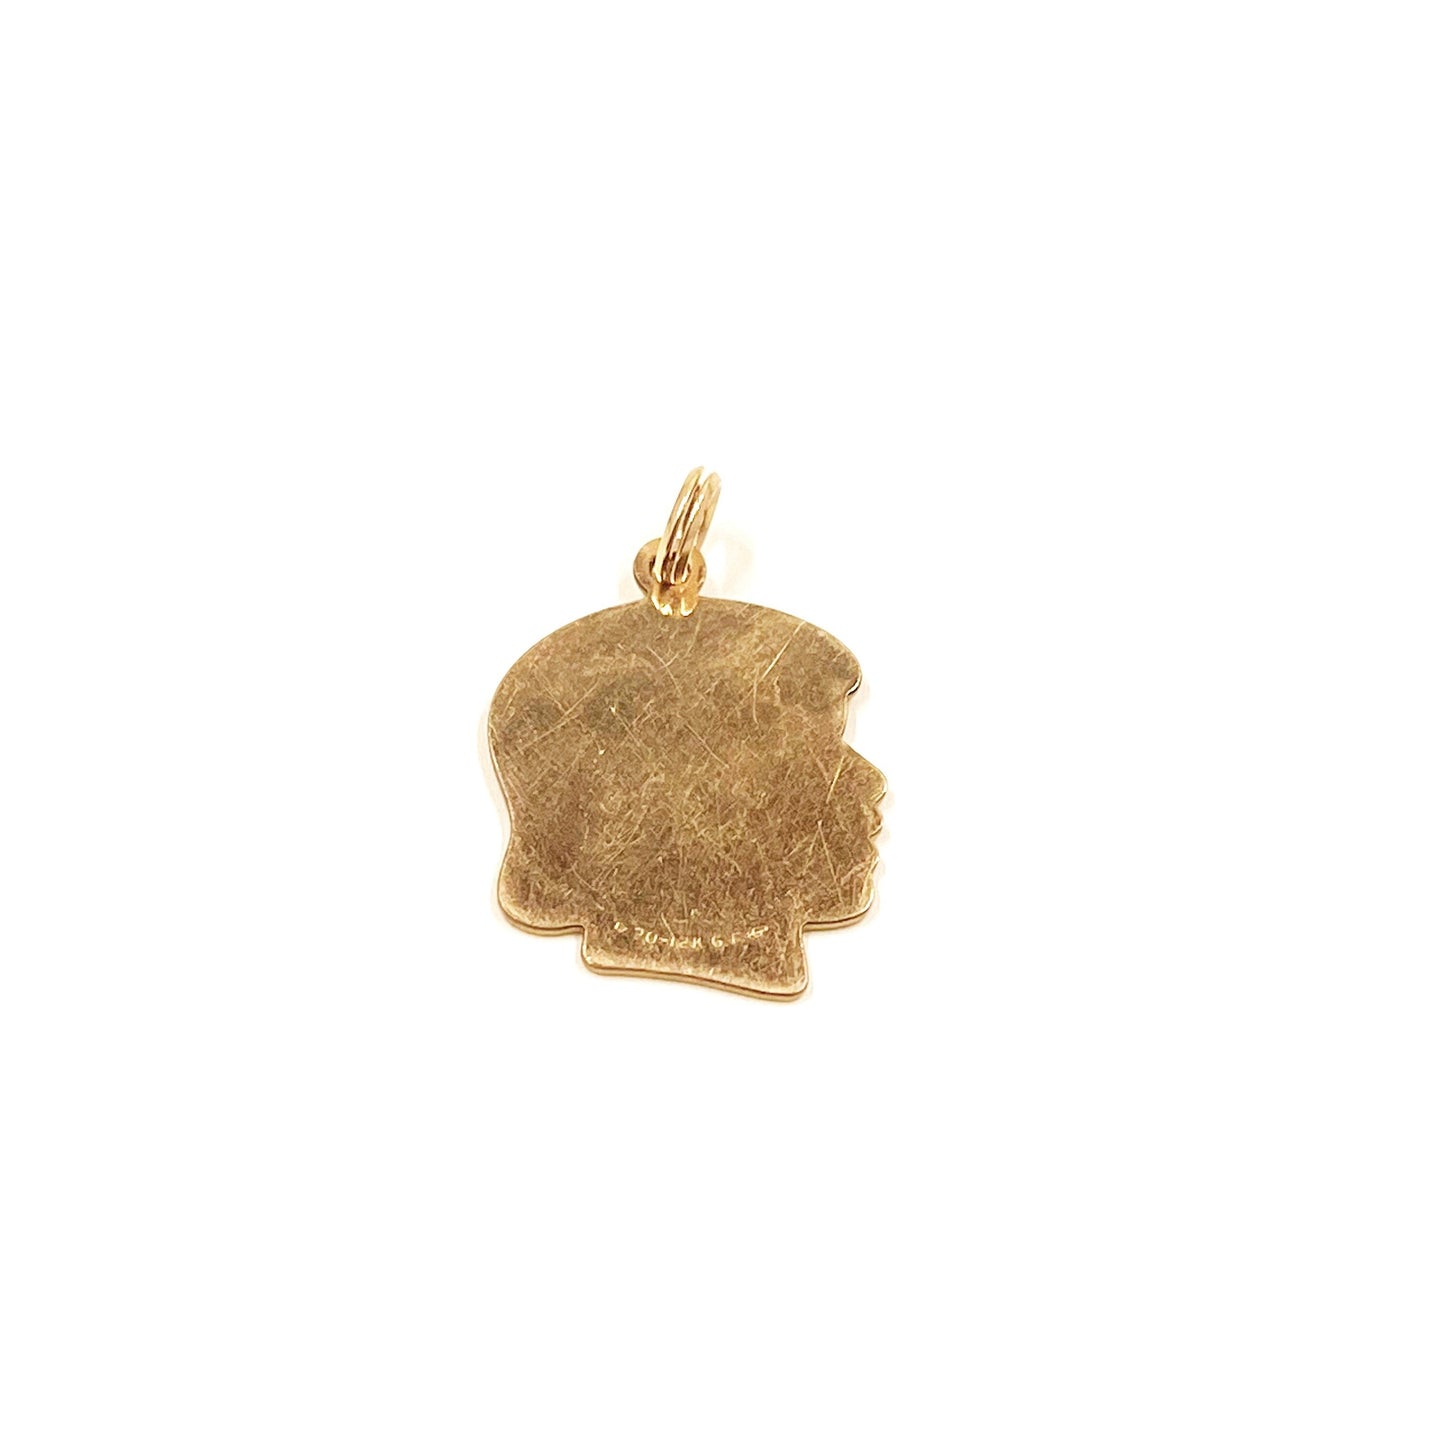 Vintage Girls Head Profile Charm | Gold Filled Girl Silhouette Charm |  R.L. Griffith 14k Gold Filled Engraving Charm